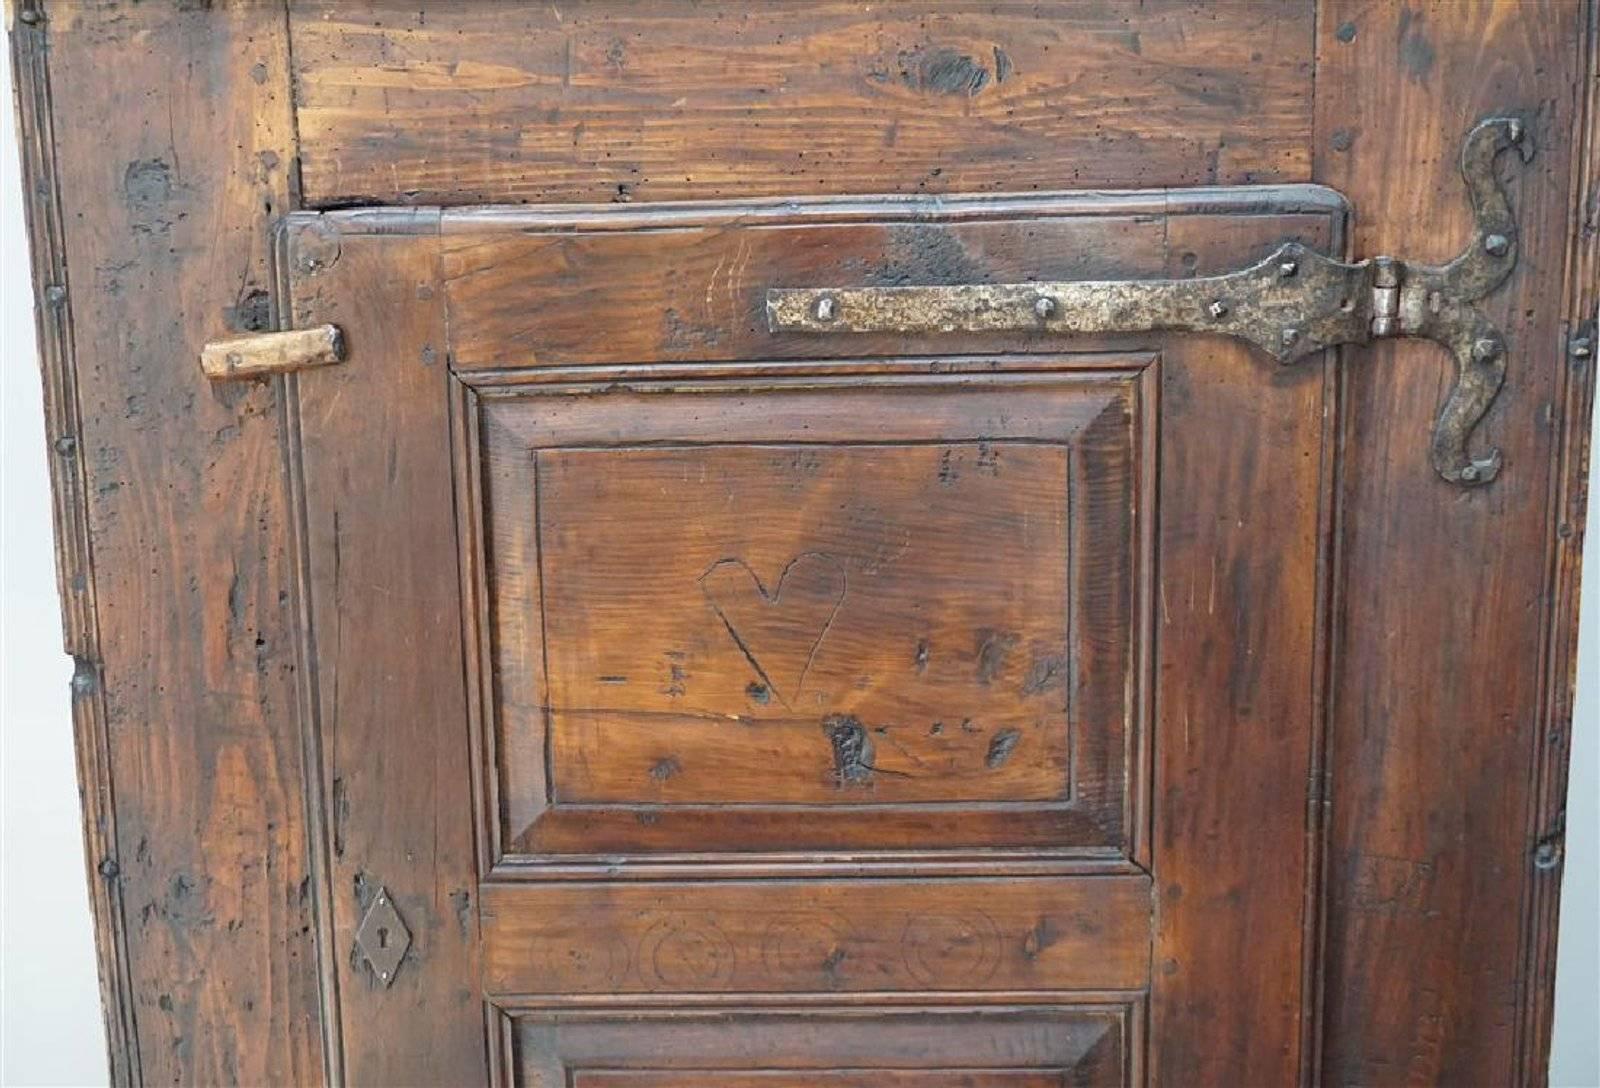 Charming small 18th century French provincial rustic cupboard made of pine and poplar with a deep patination and rich lustrous color. Made in the Dordogne region with a single paneled door retaining the original scrolled strap hinges. Good small